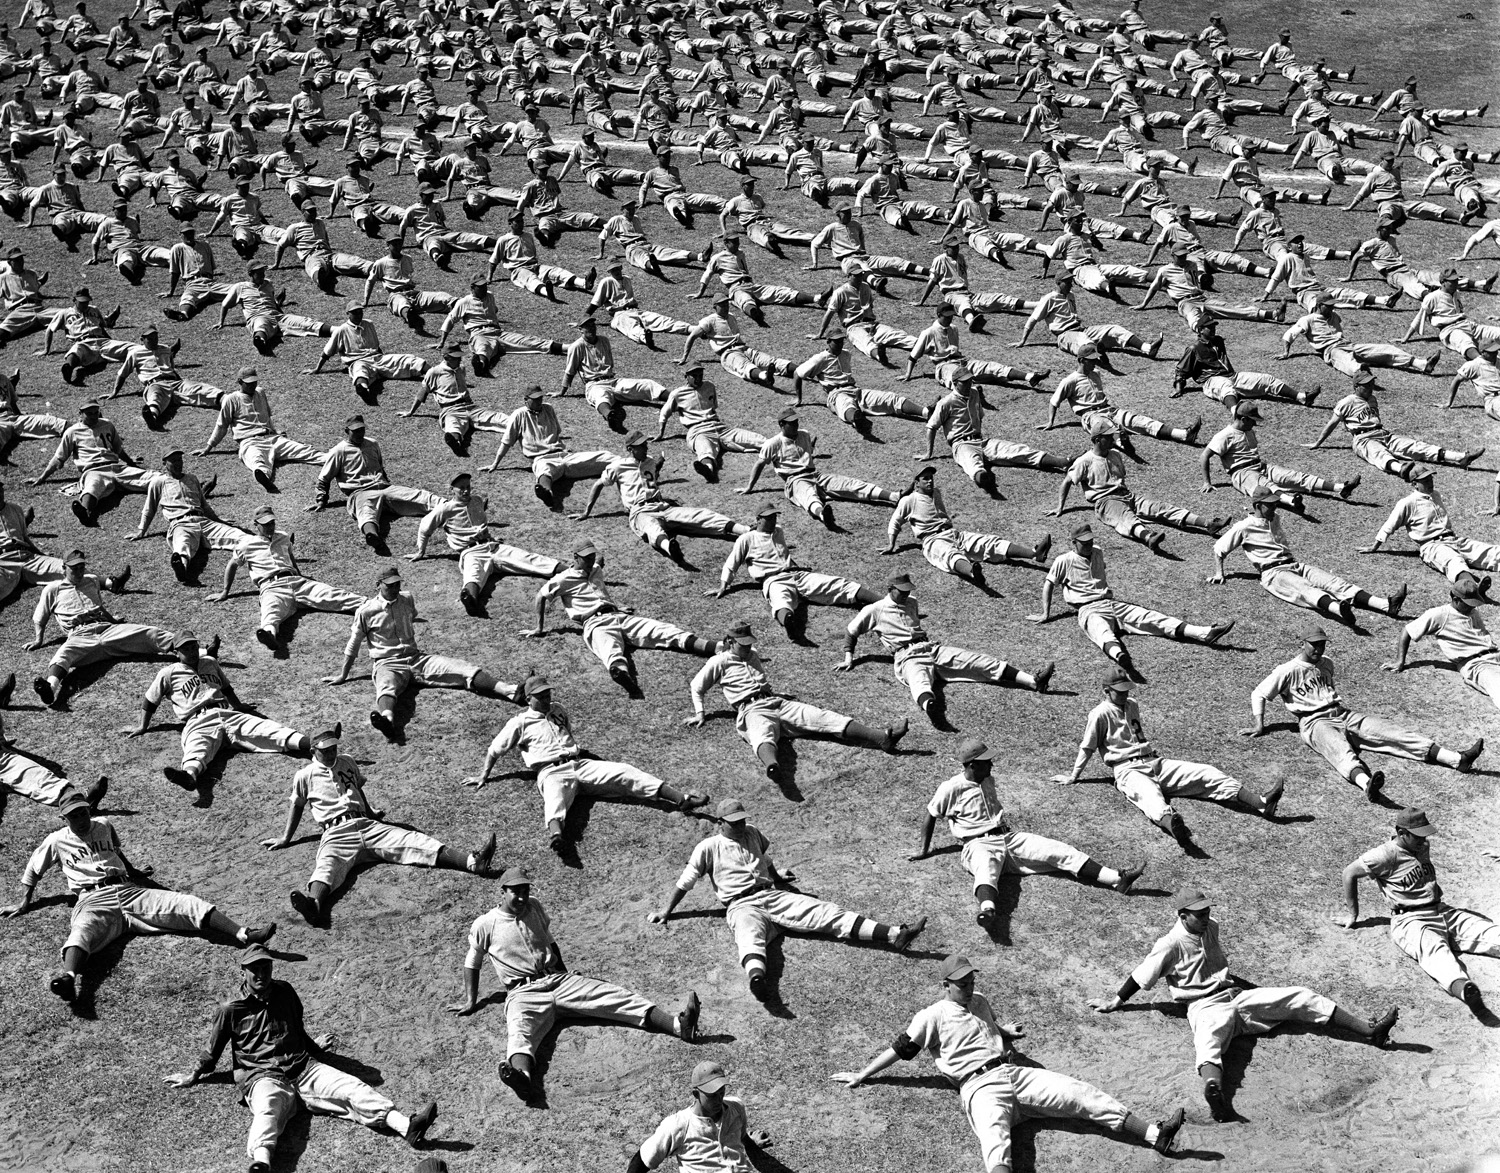 Brooklyn Dodger rookie hopefuls work out at spring training, 1948.